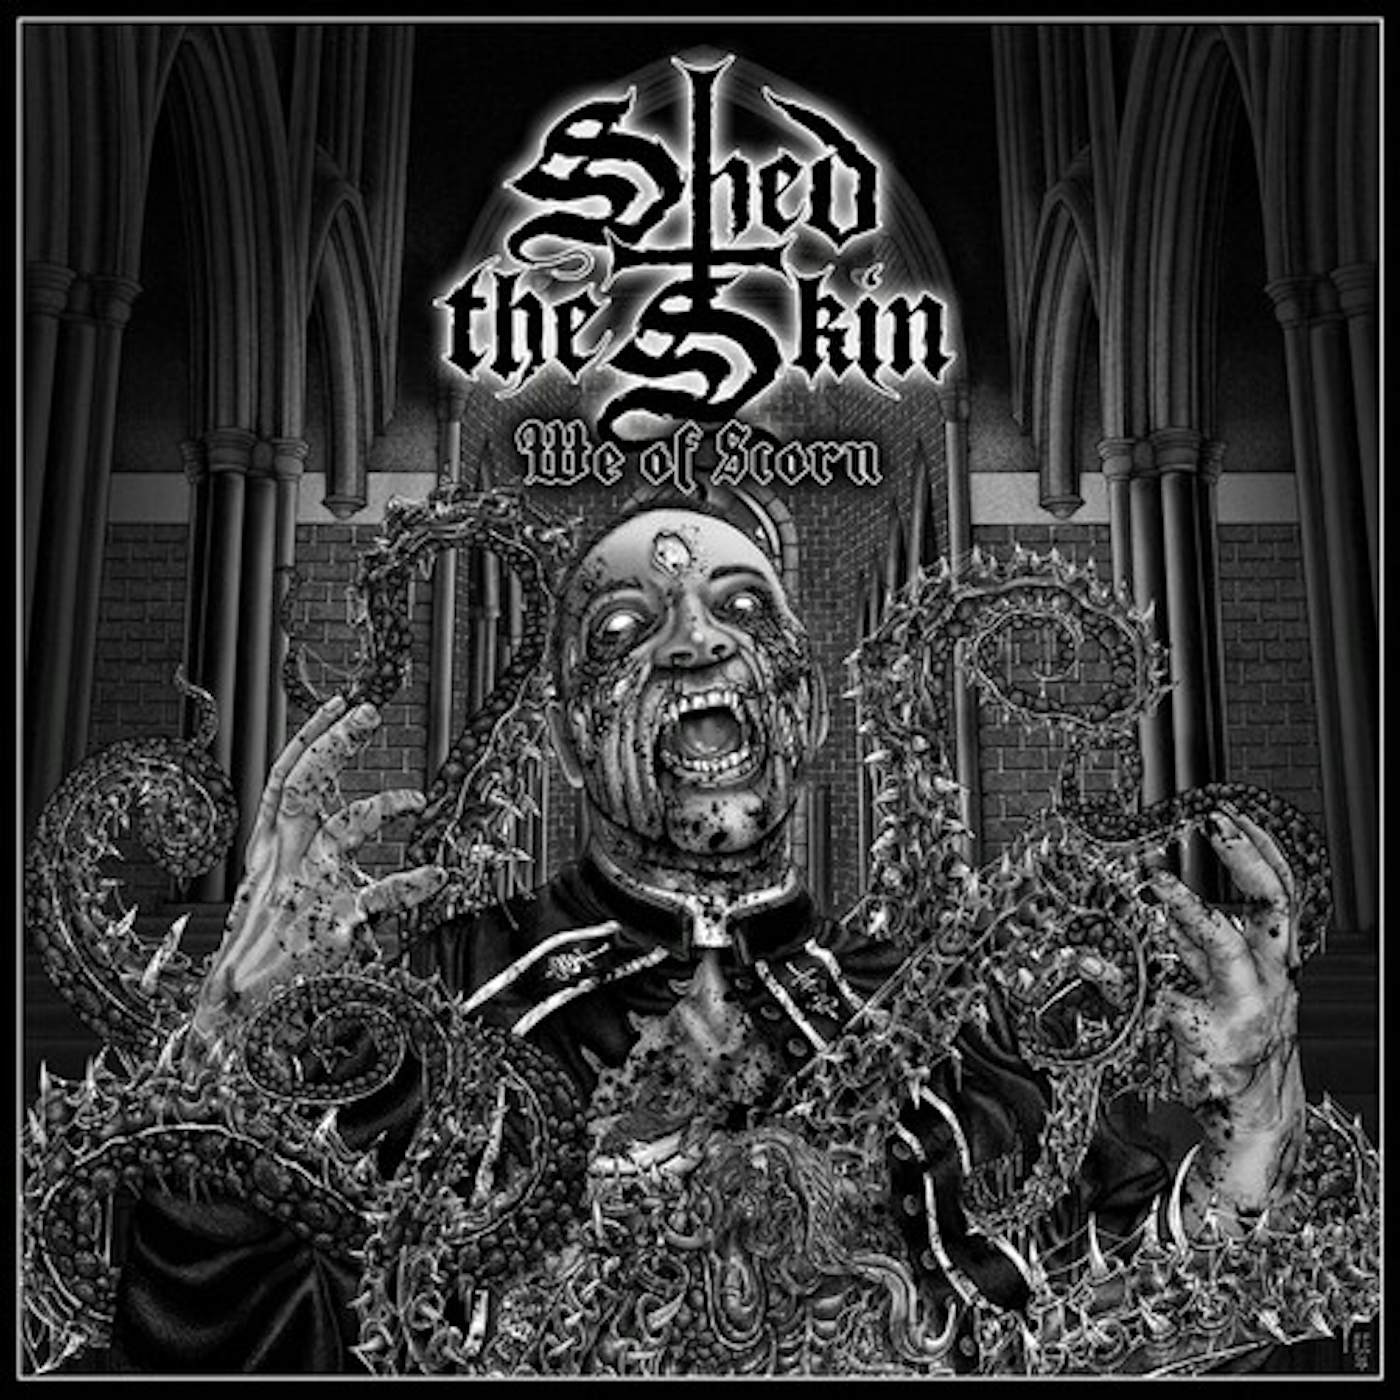 Shed the Skin We of Scorn Vinyl Record